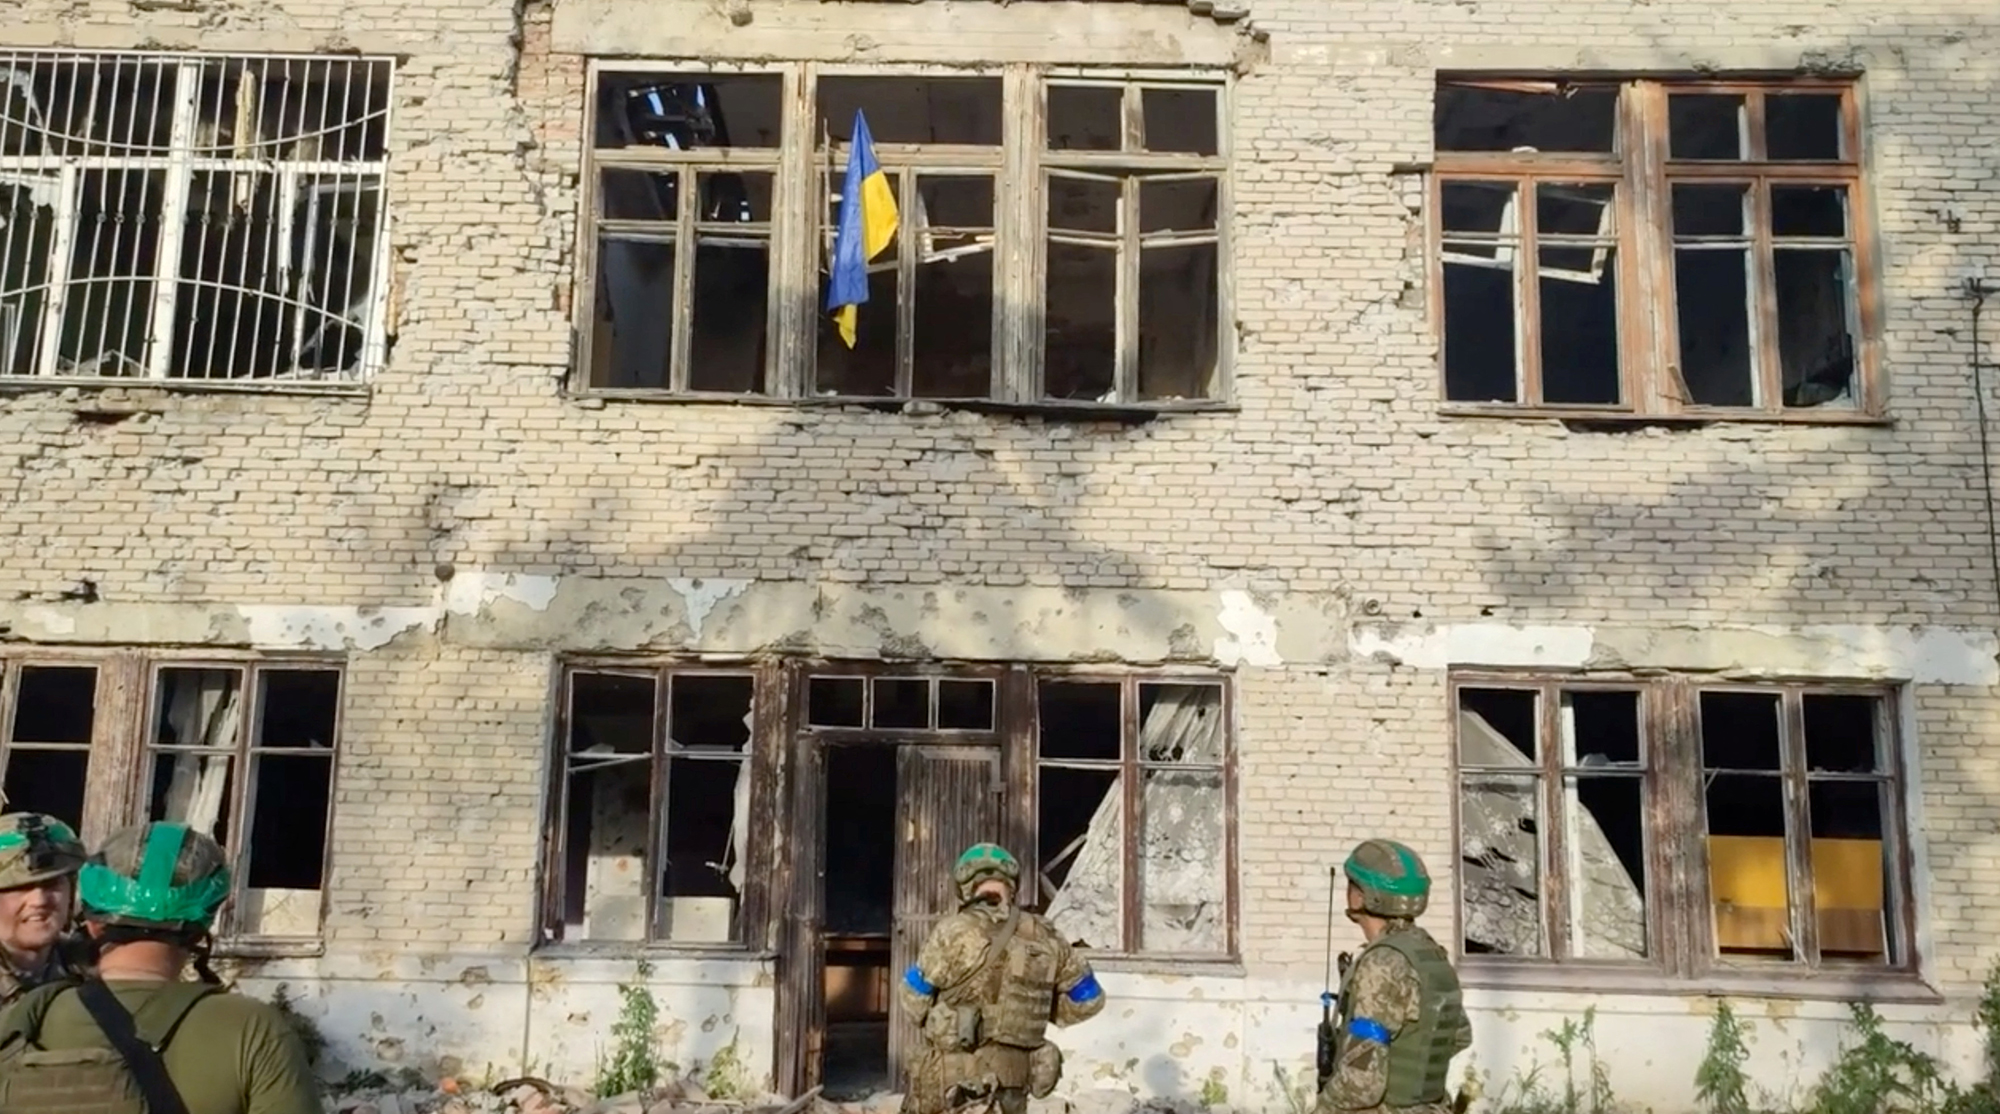 Ukrainian soldiers stand in front of a building with a Ukrainian flag, during an operation that claims to liberate the village of Blahodatne, in this screengrab taken from a handout video released on June 11. 